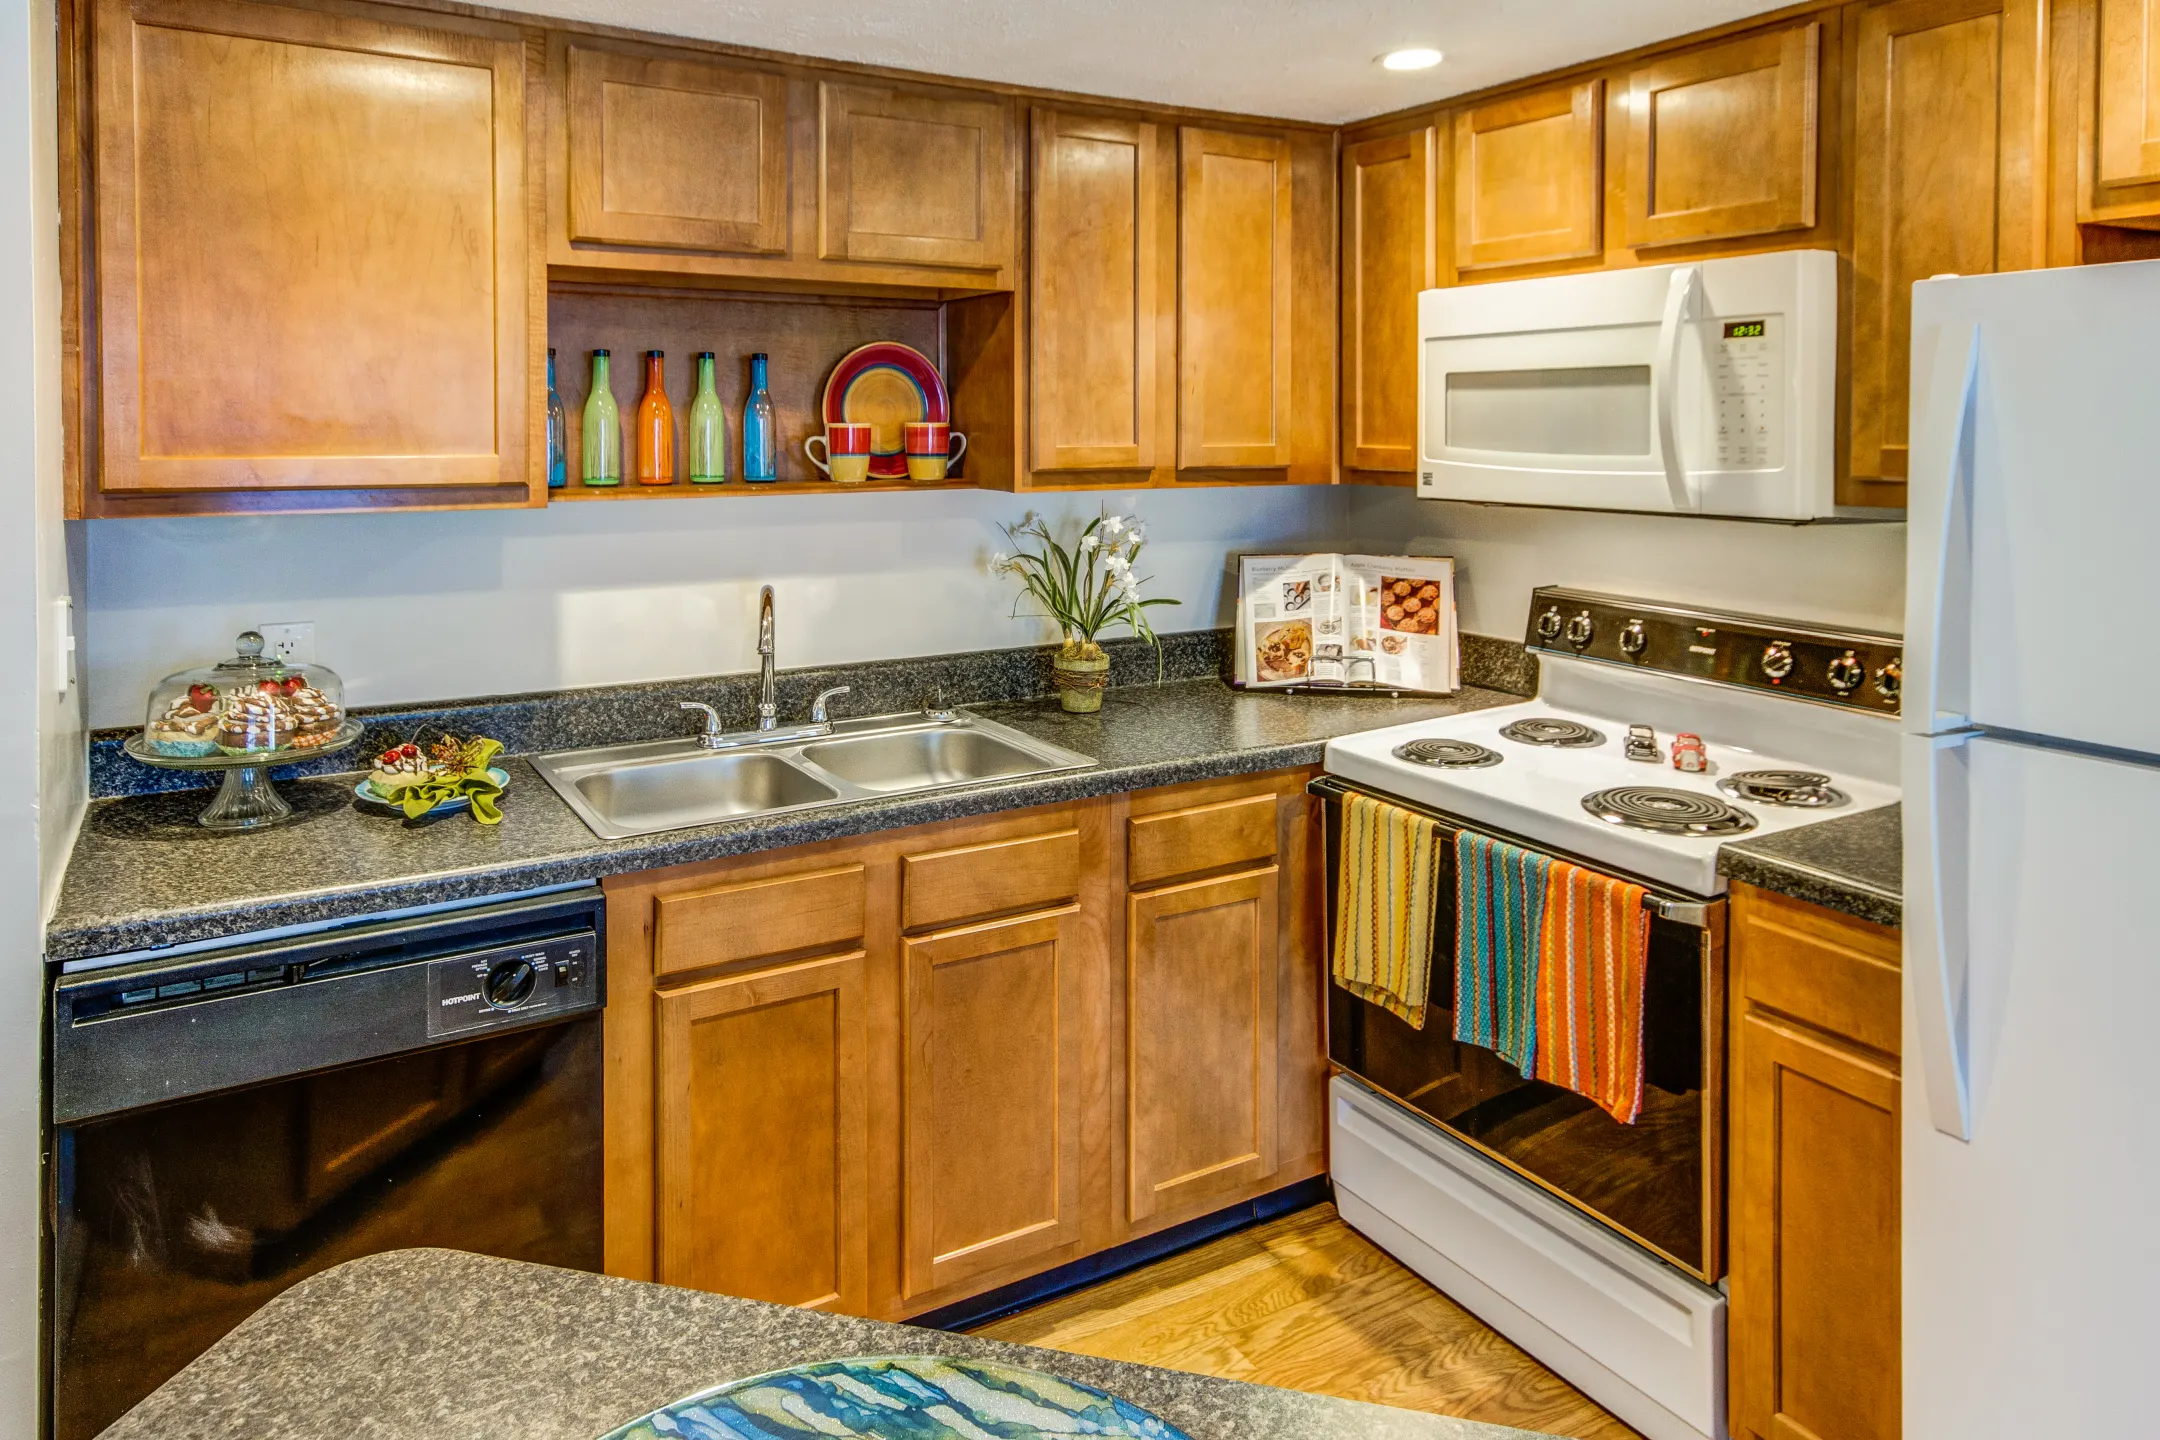 Kitchen - Creek Bay At Meridian Woods - Indianapolis, IN